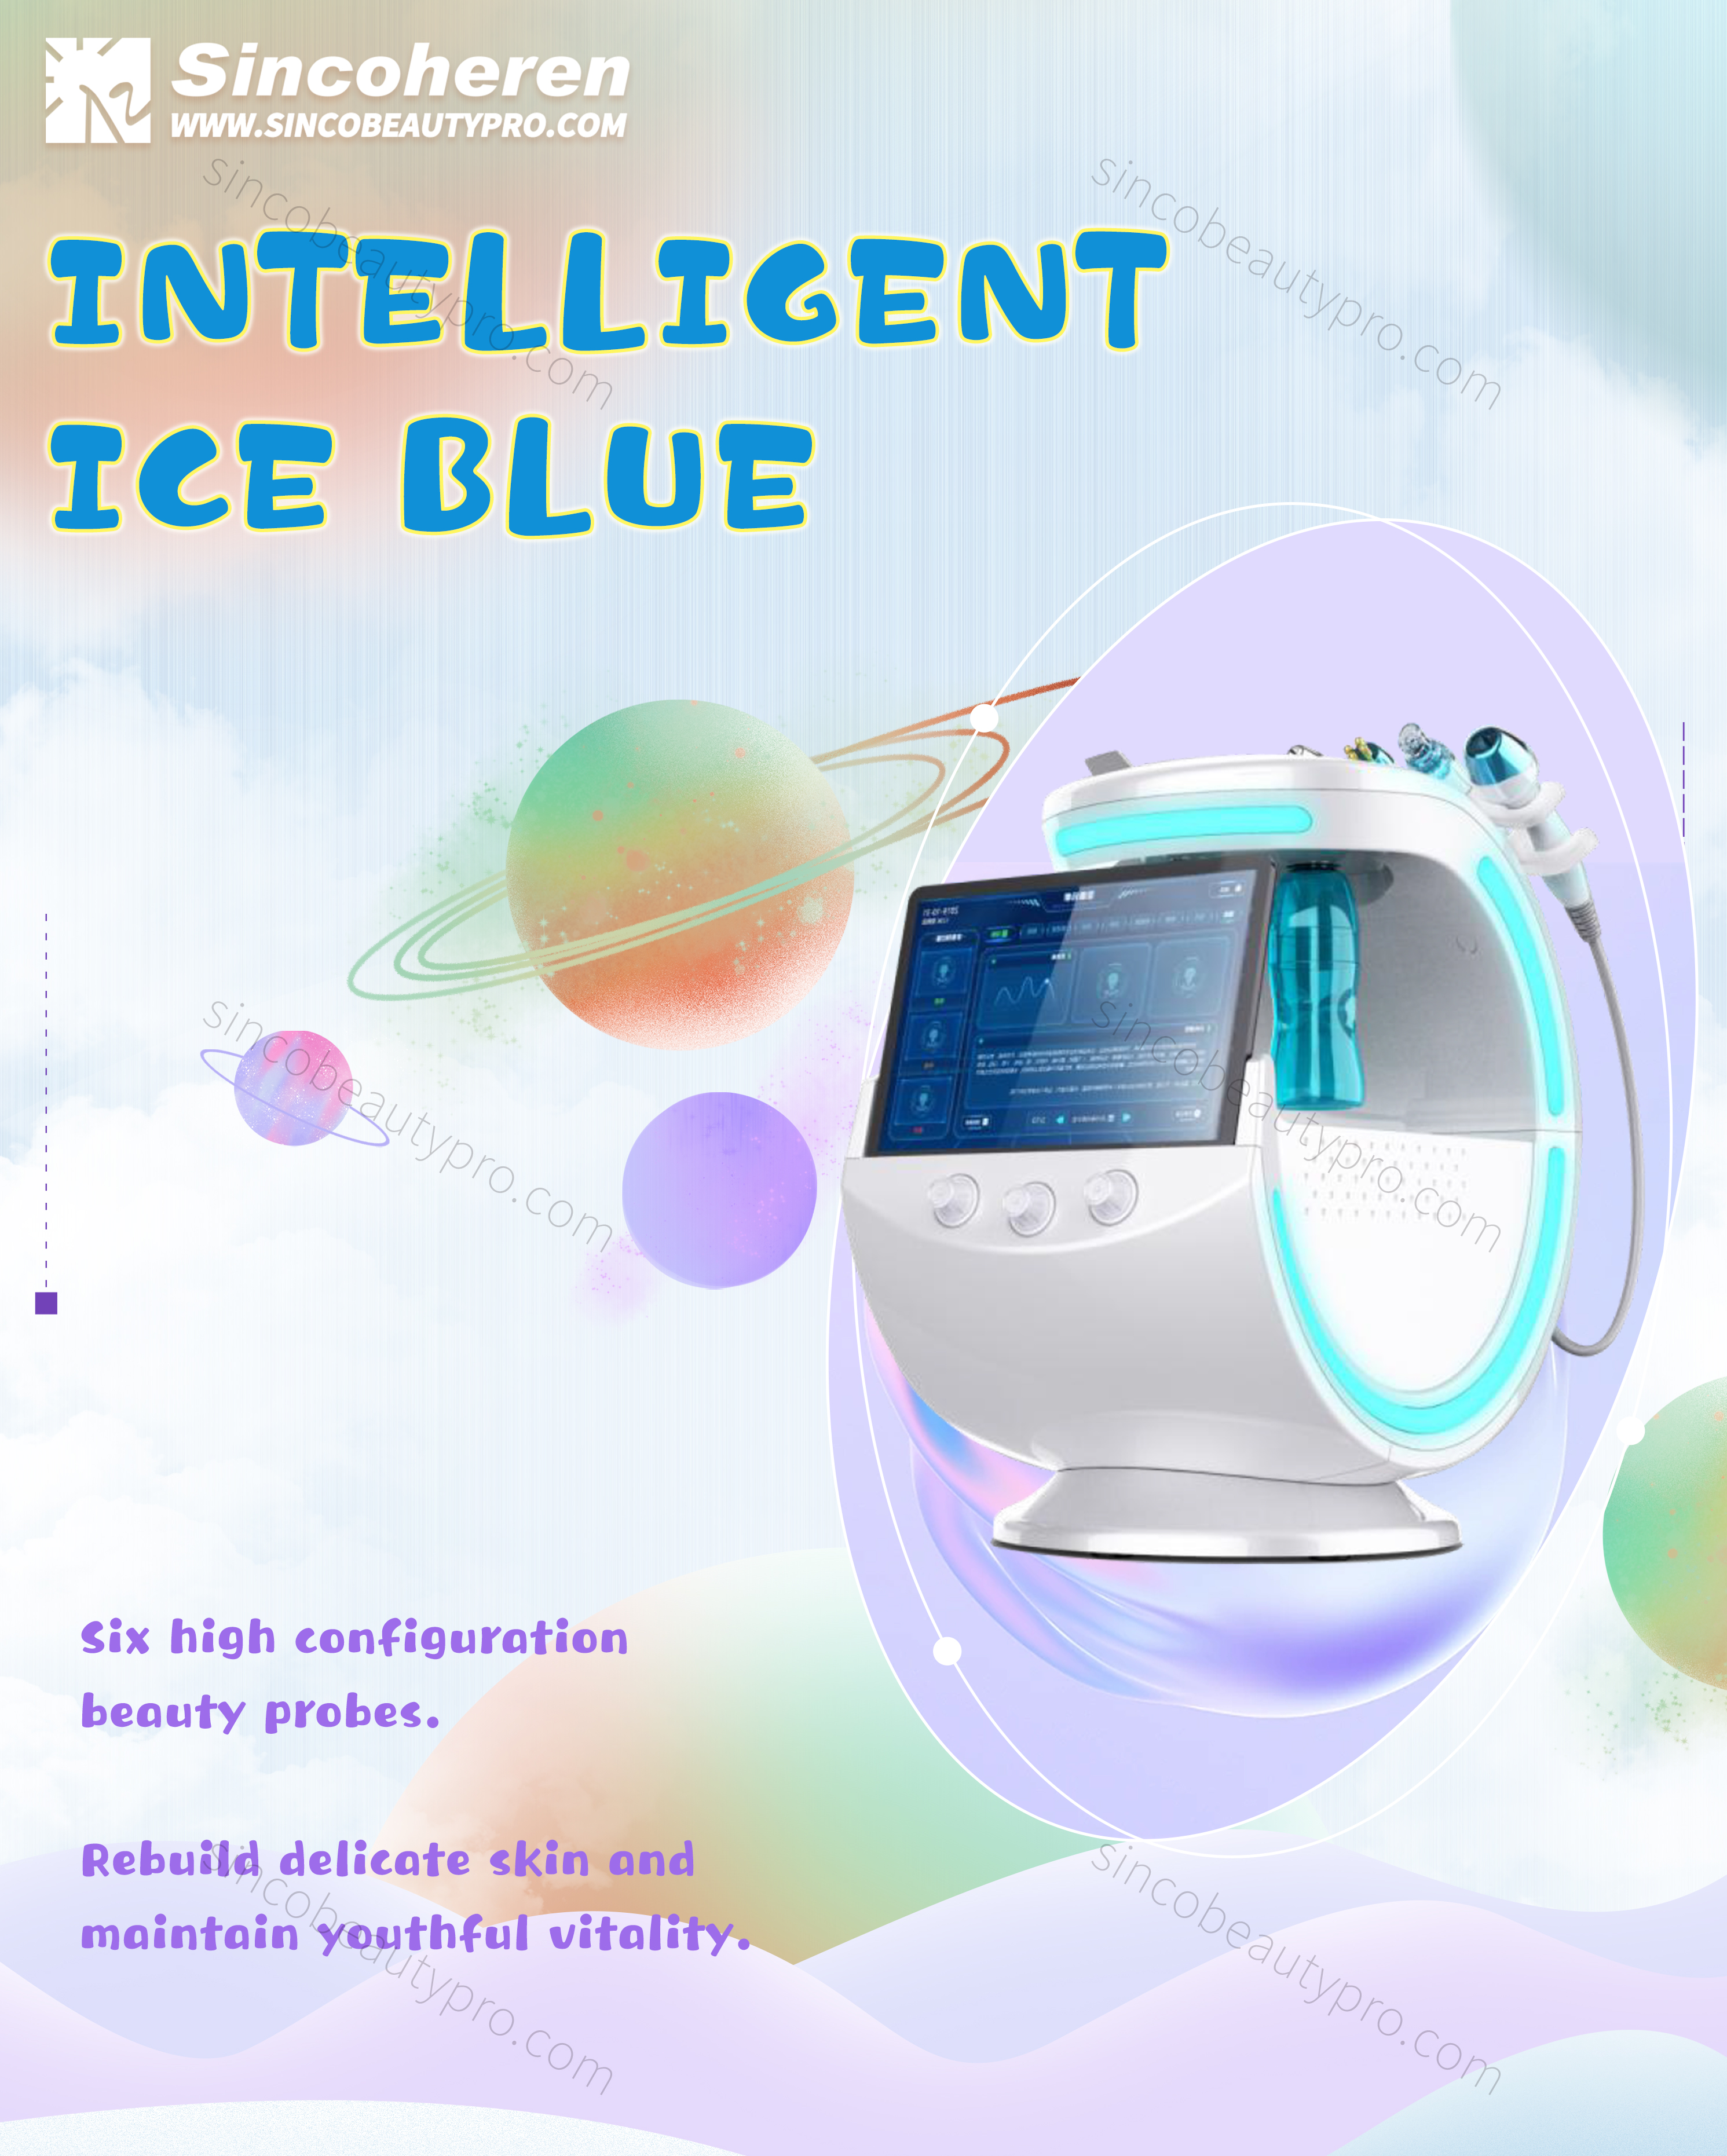 7in1 Portable The Intelligent Ice Blue Skin Management System Pro Release